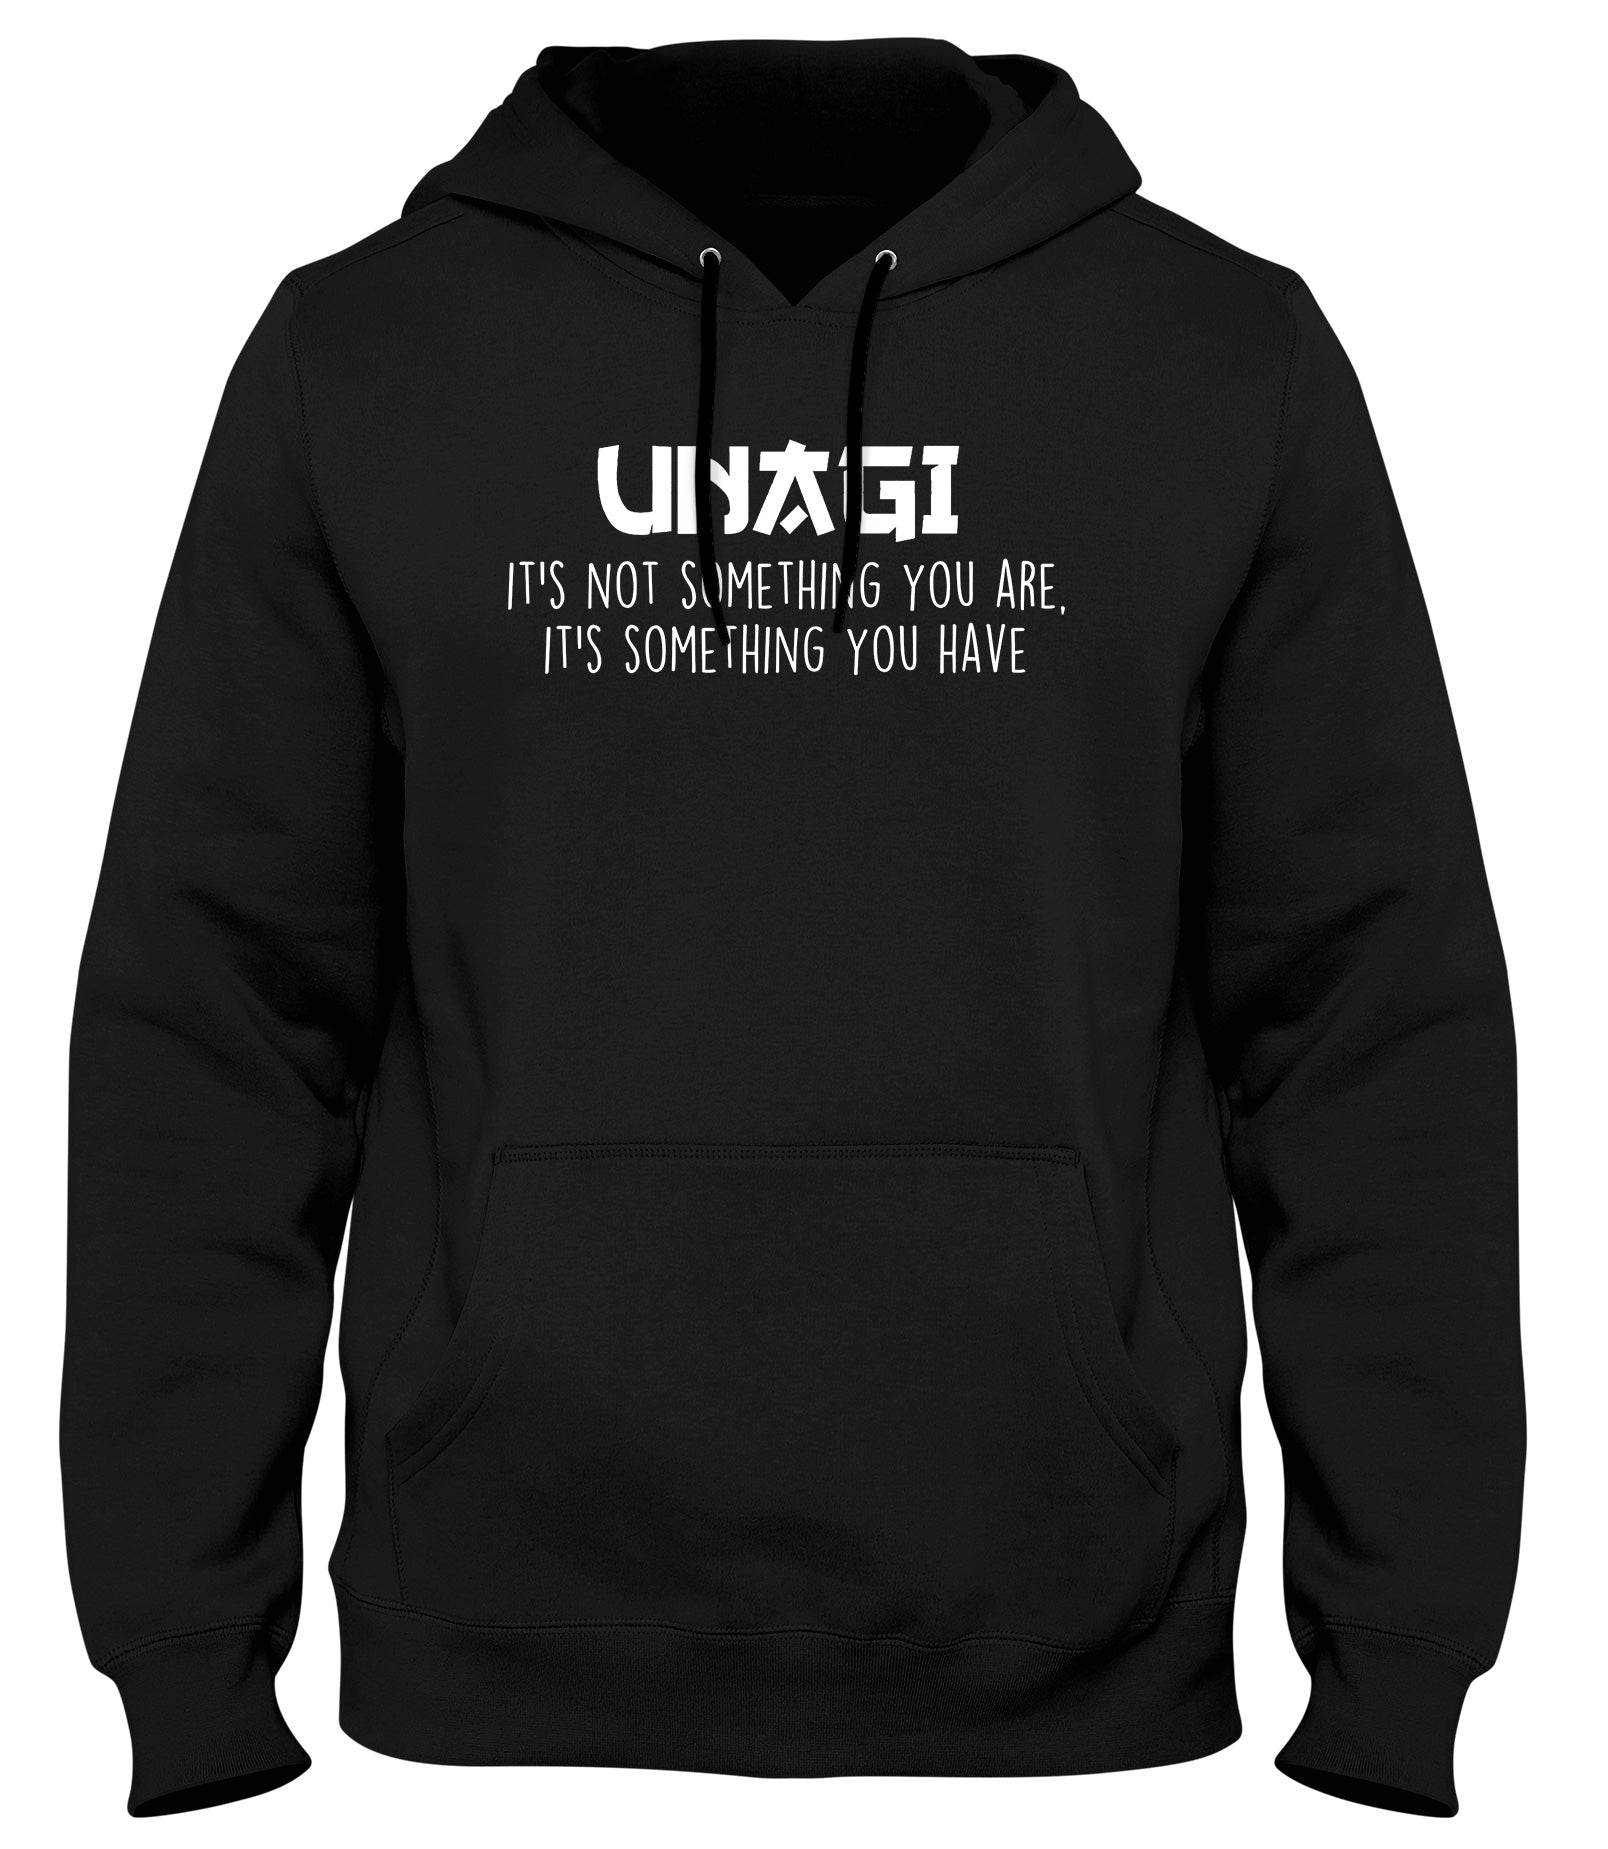 UNAGI IT'S NOT SOMETHING YOU ARE IT'S SOMETHING YOU HAVE MENS WOMENS LADIES UNISEX FUNNY SLOGAN HOODIE